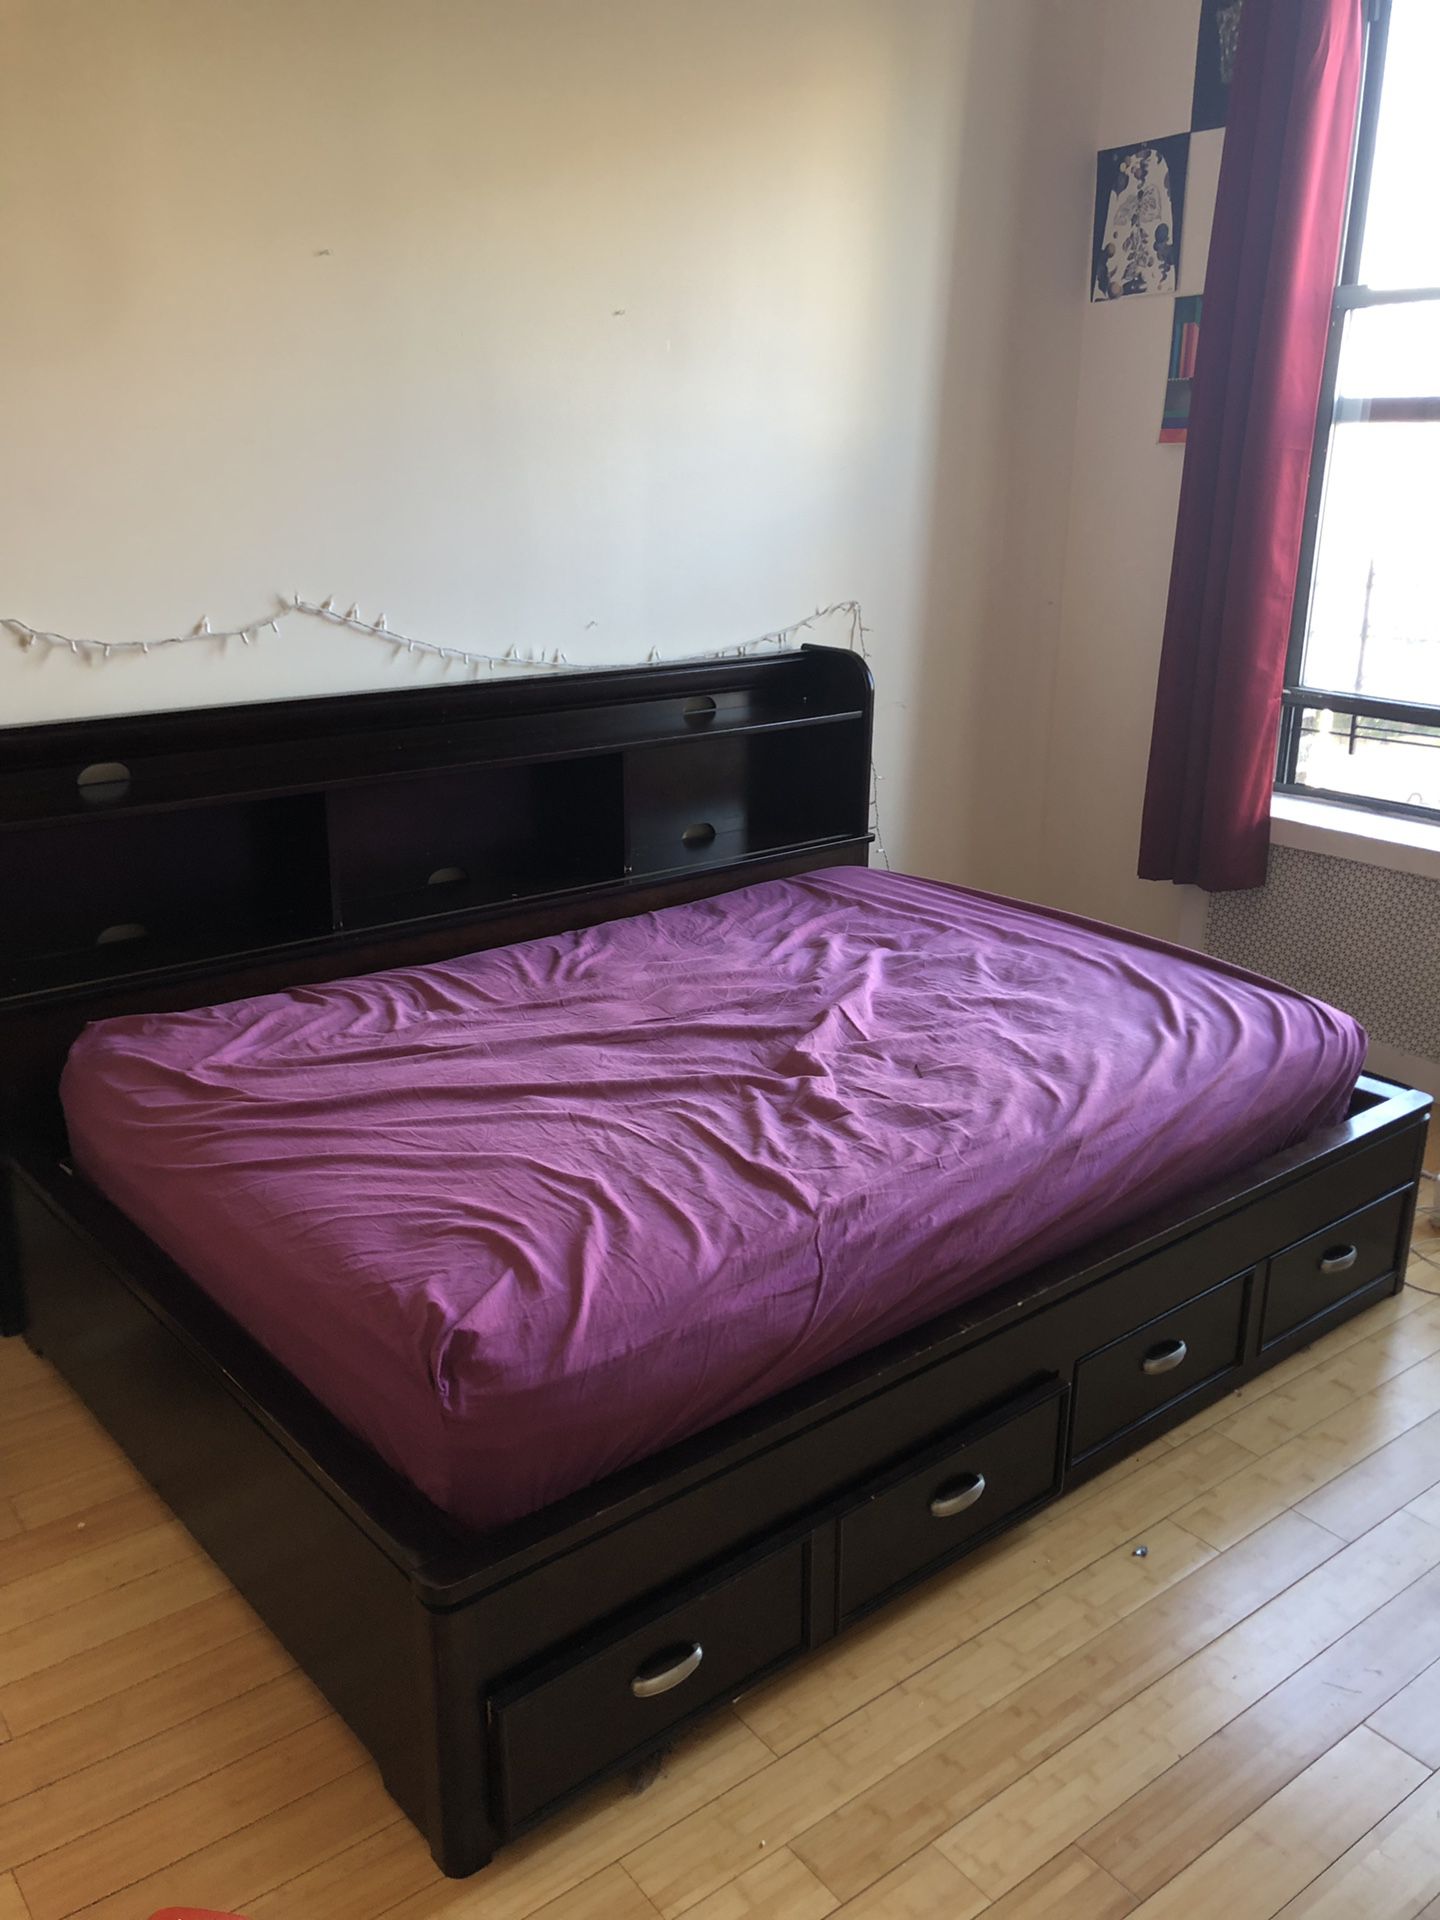 Storage/bookshelf bed frame - full size bed (mattress not included)